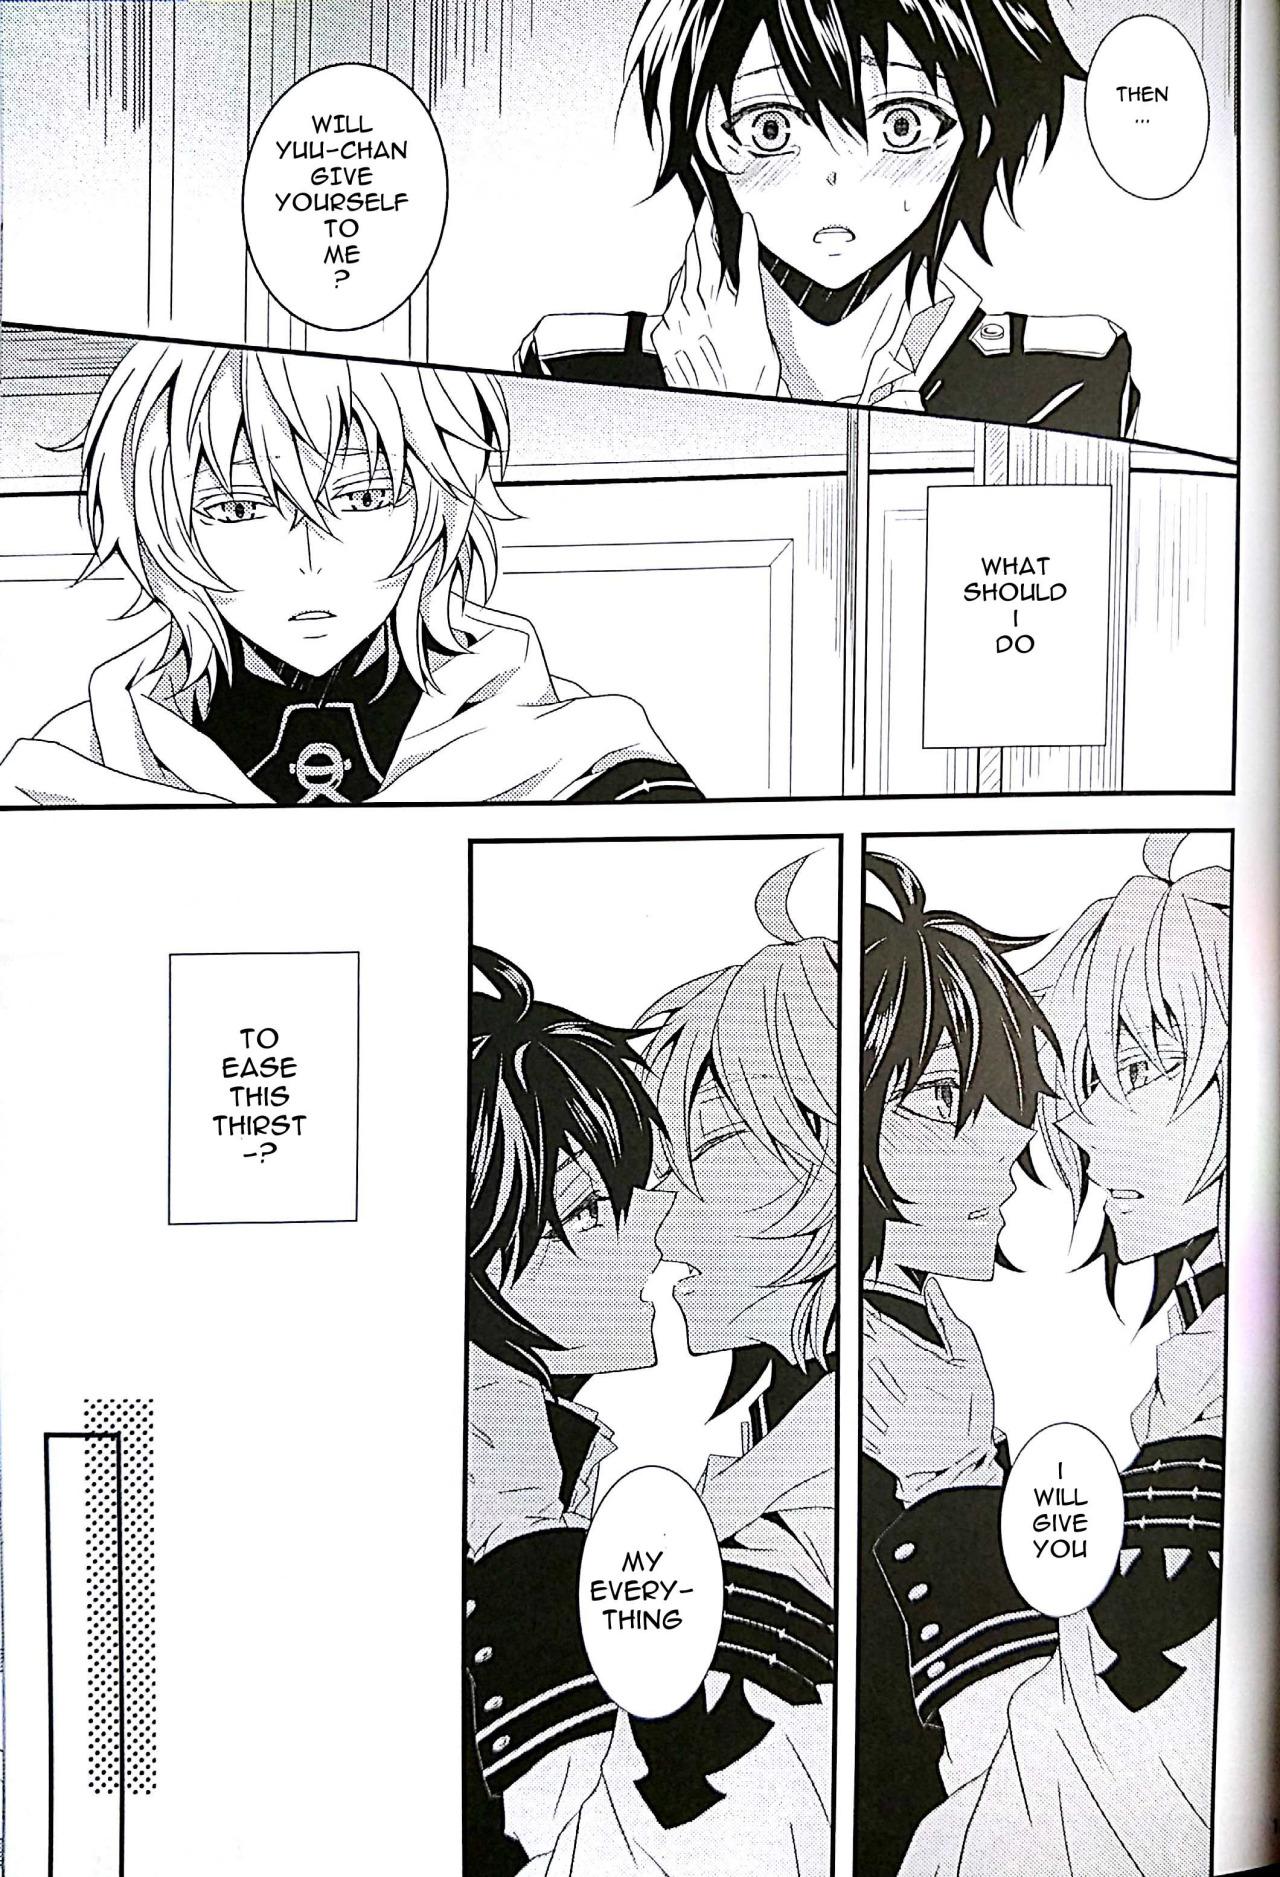 Women Sucking Dick Thirst for blood - Seraph of the end Gayfuck - Page 11